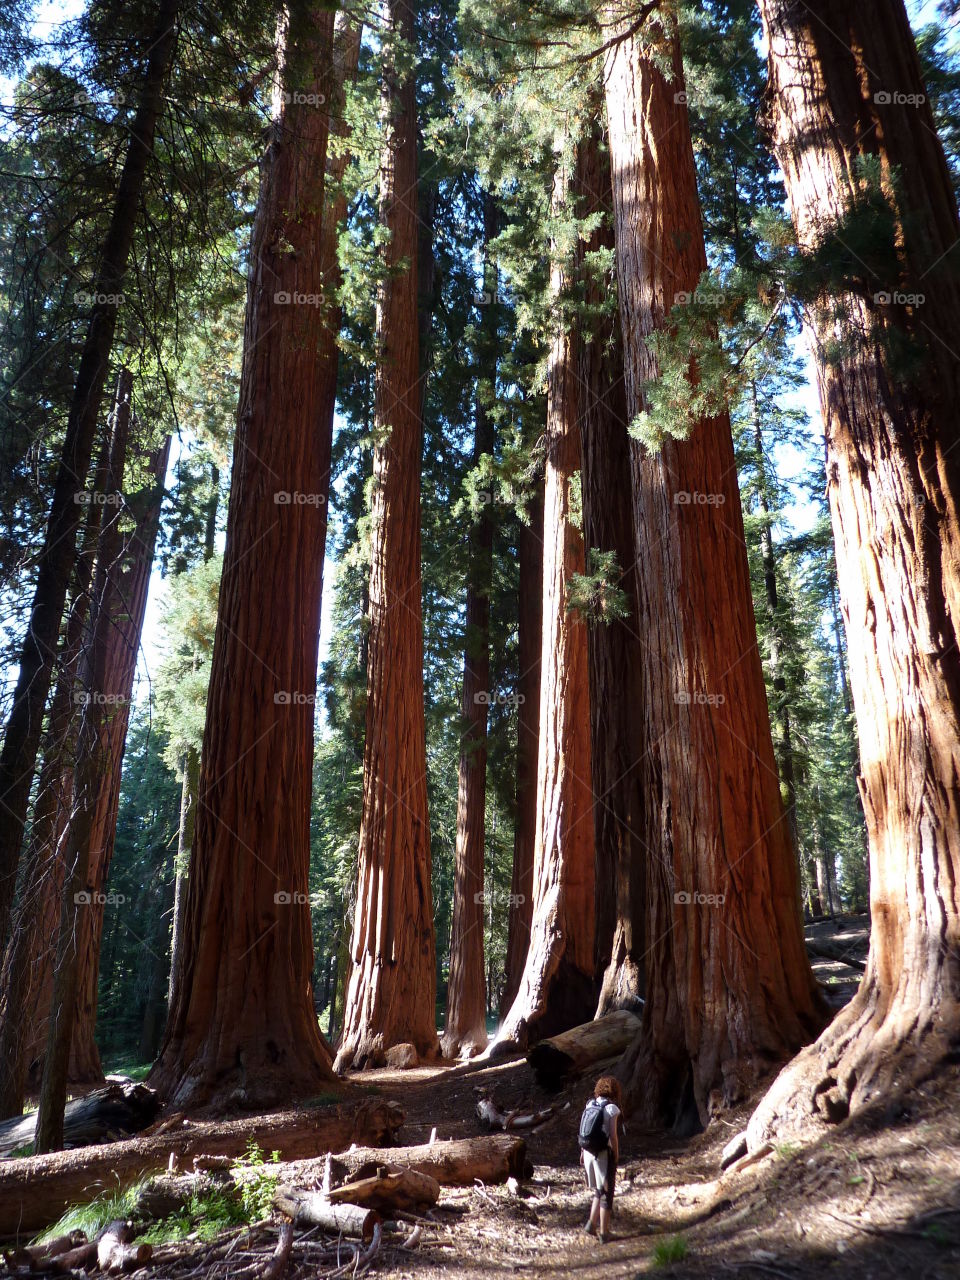 Walking With Giants. The magical Sequoia National Park, California...